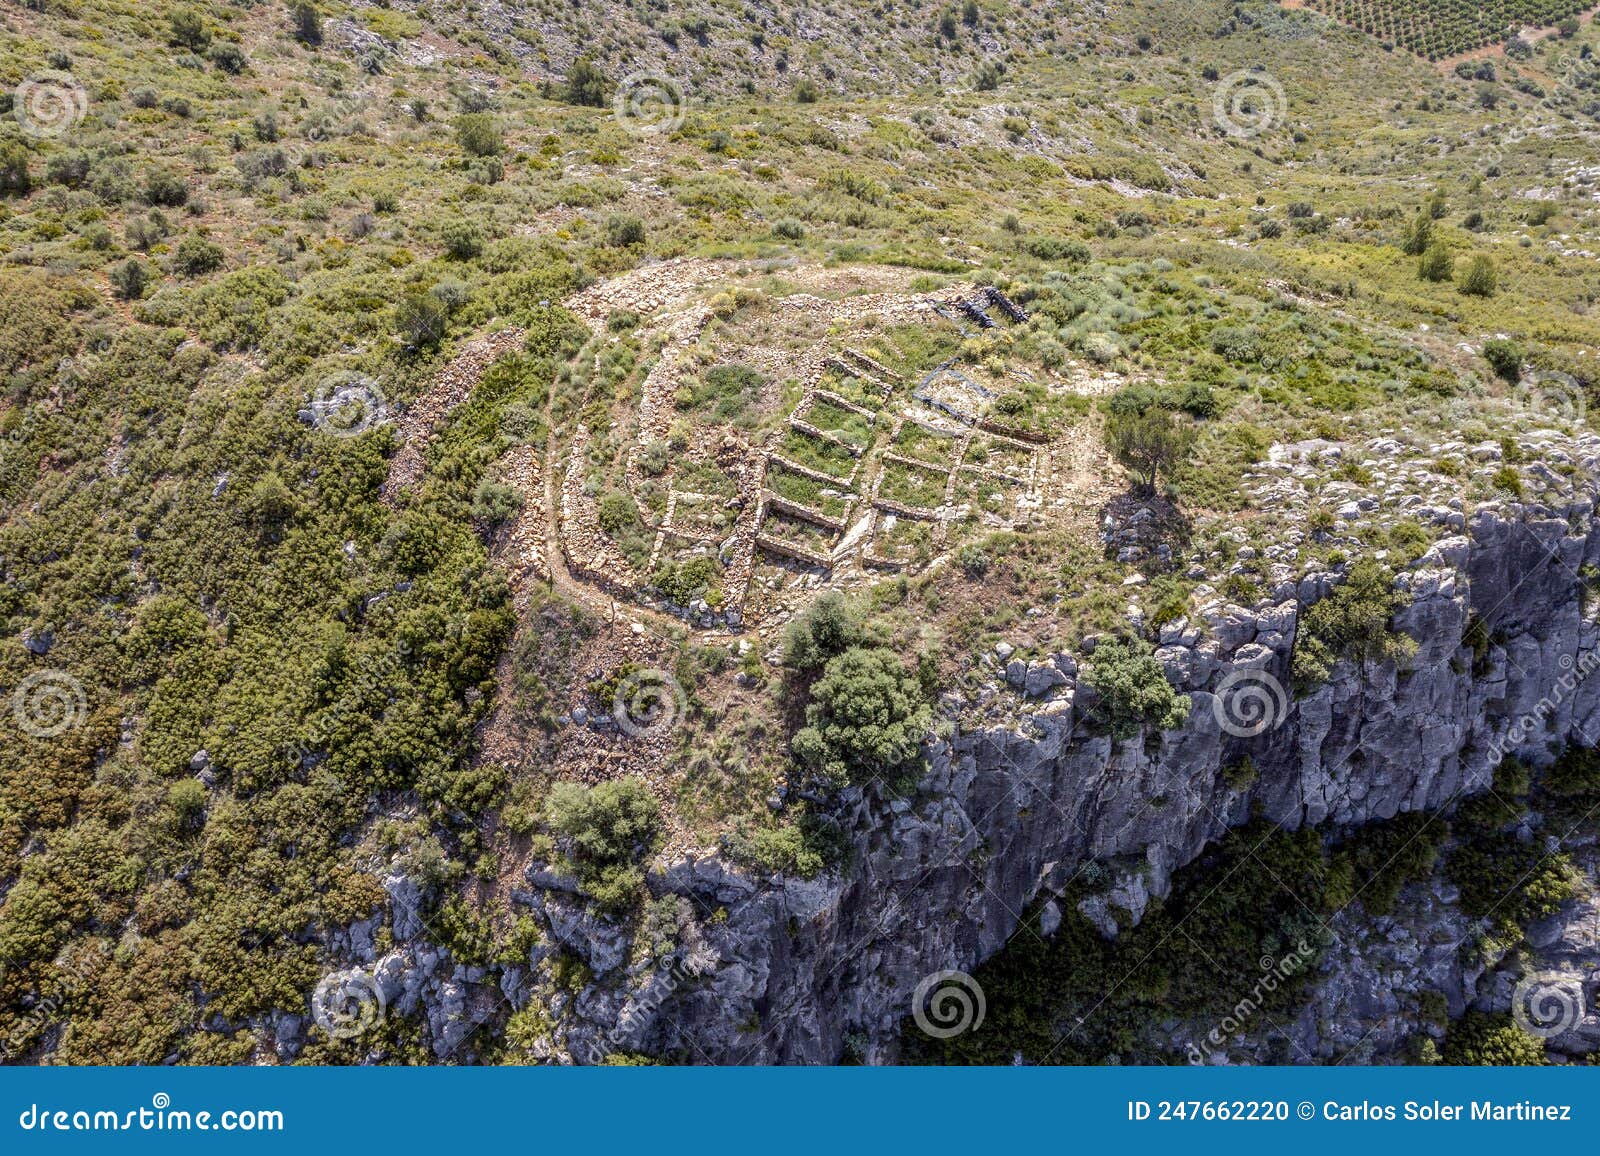 tossal del mortorum is an archaeological site located on a hill facing the coastal plain of ribera de cabanes, spain